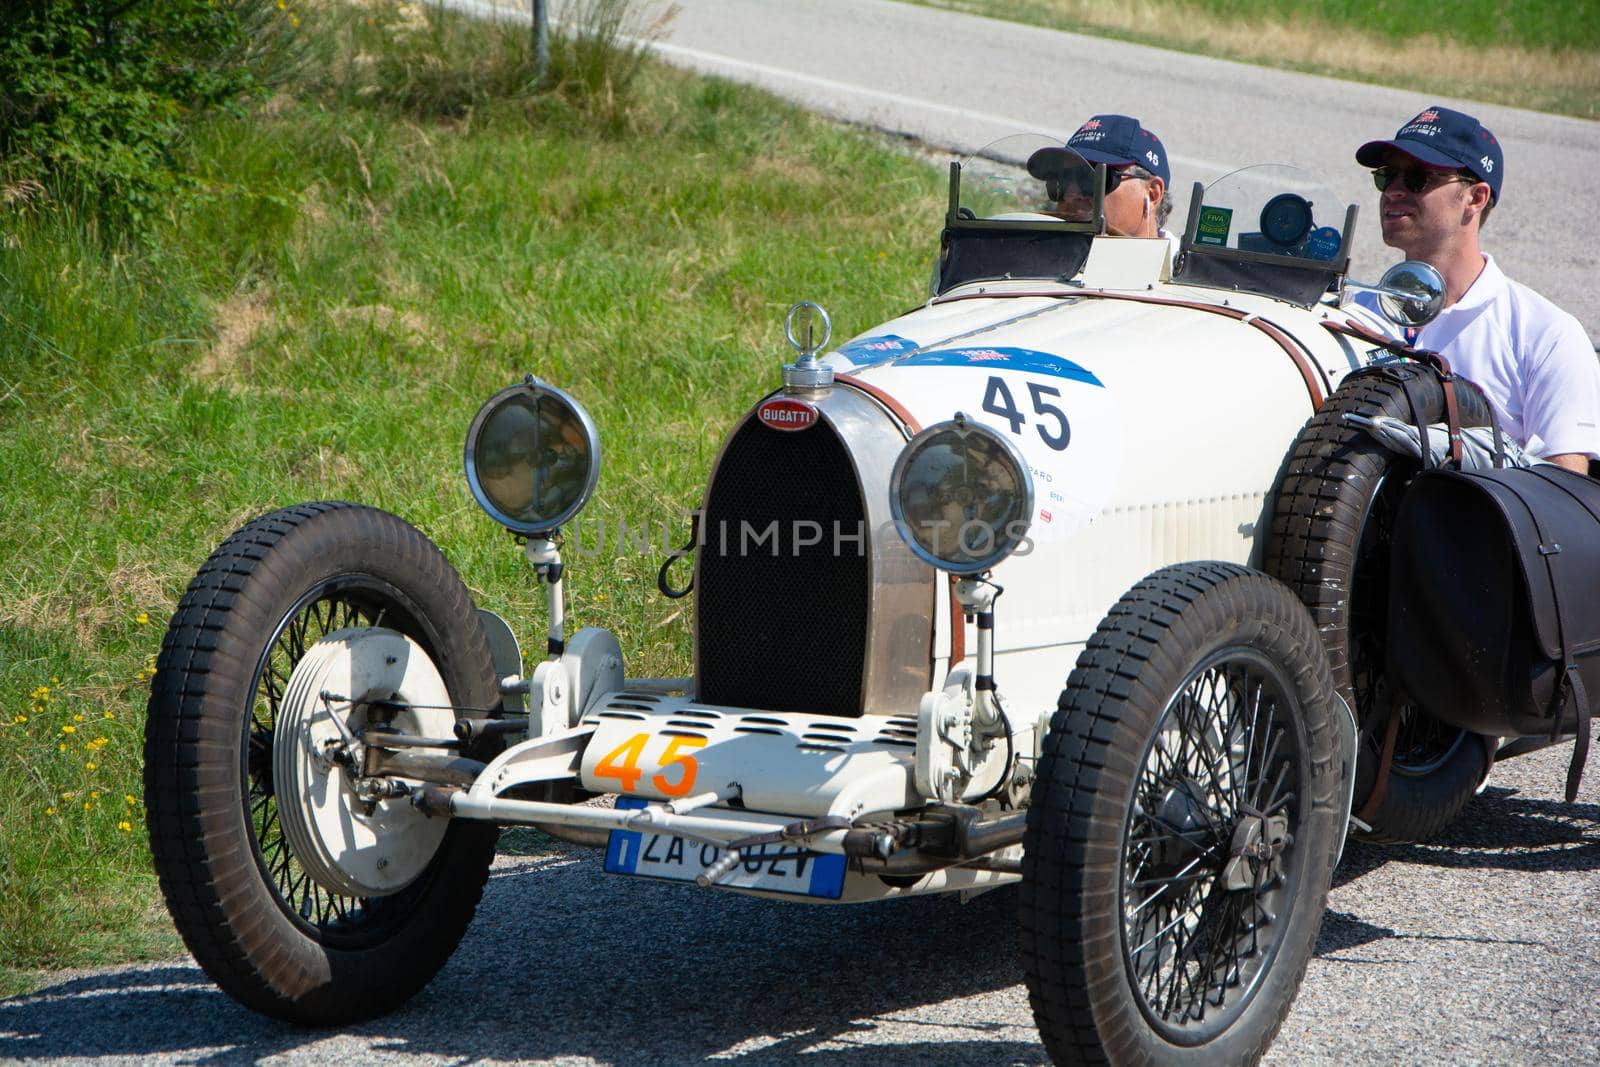 LANCIA LAMBA V SERIE CASARO 1925 on an old racing car in rally Mille Miglia 2022 the famous italian historical race (1927-1957 by massimocampanari